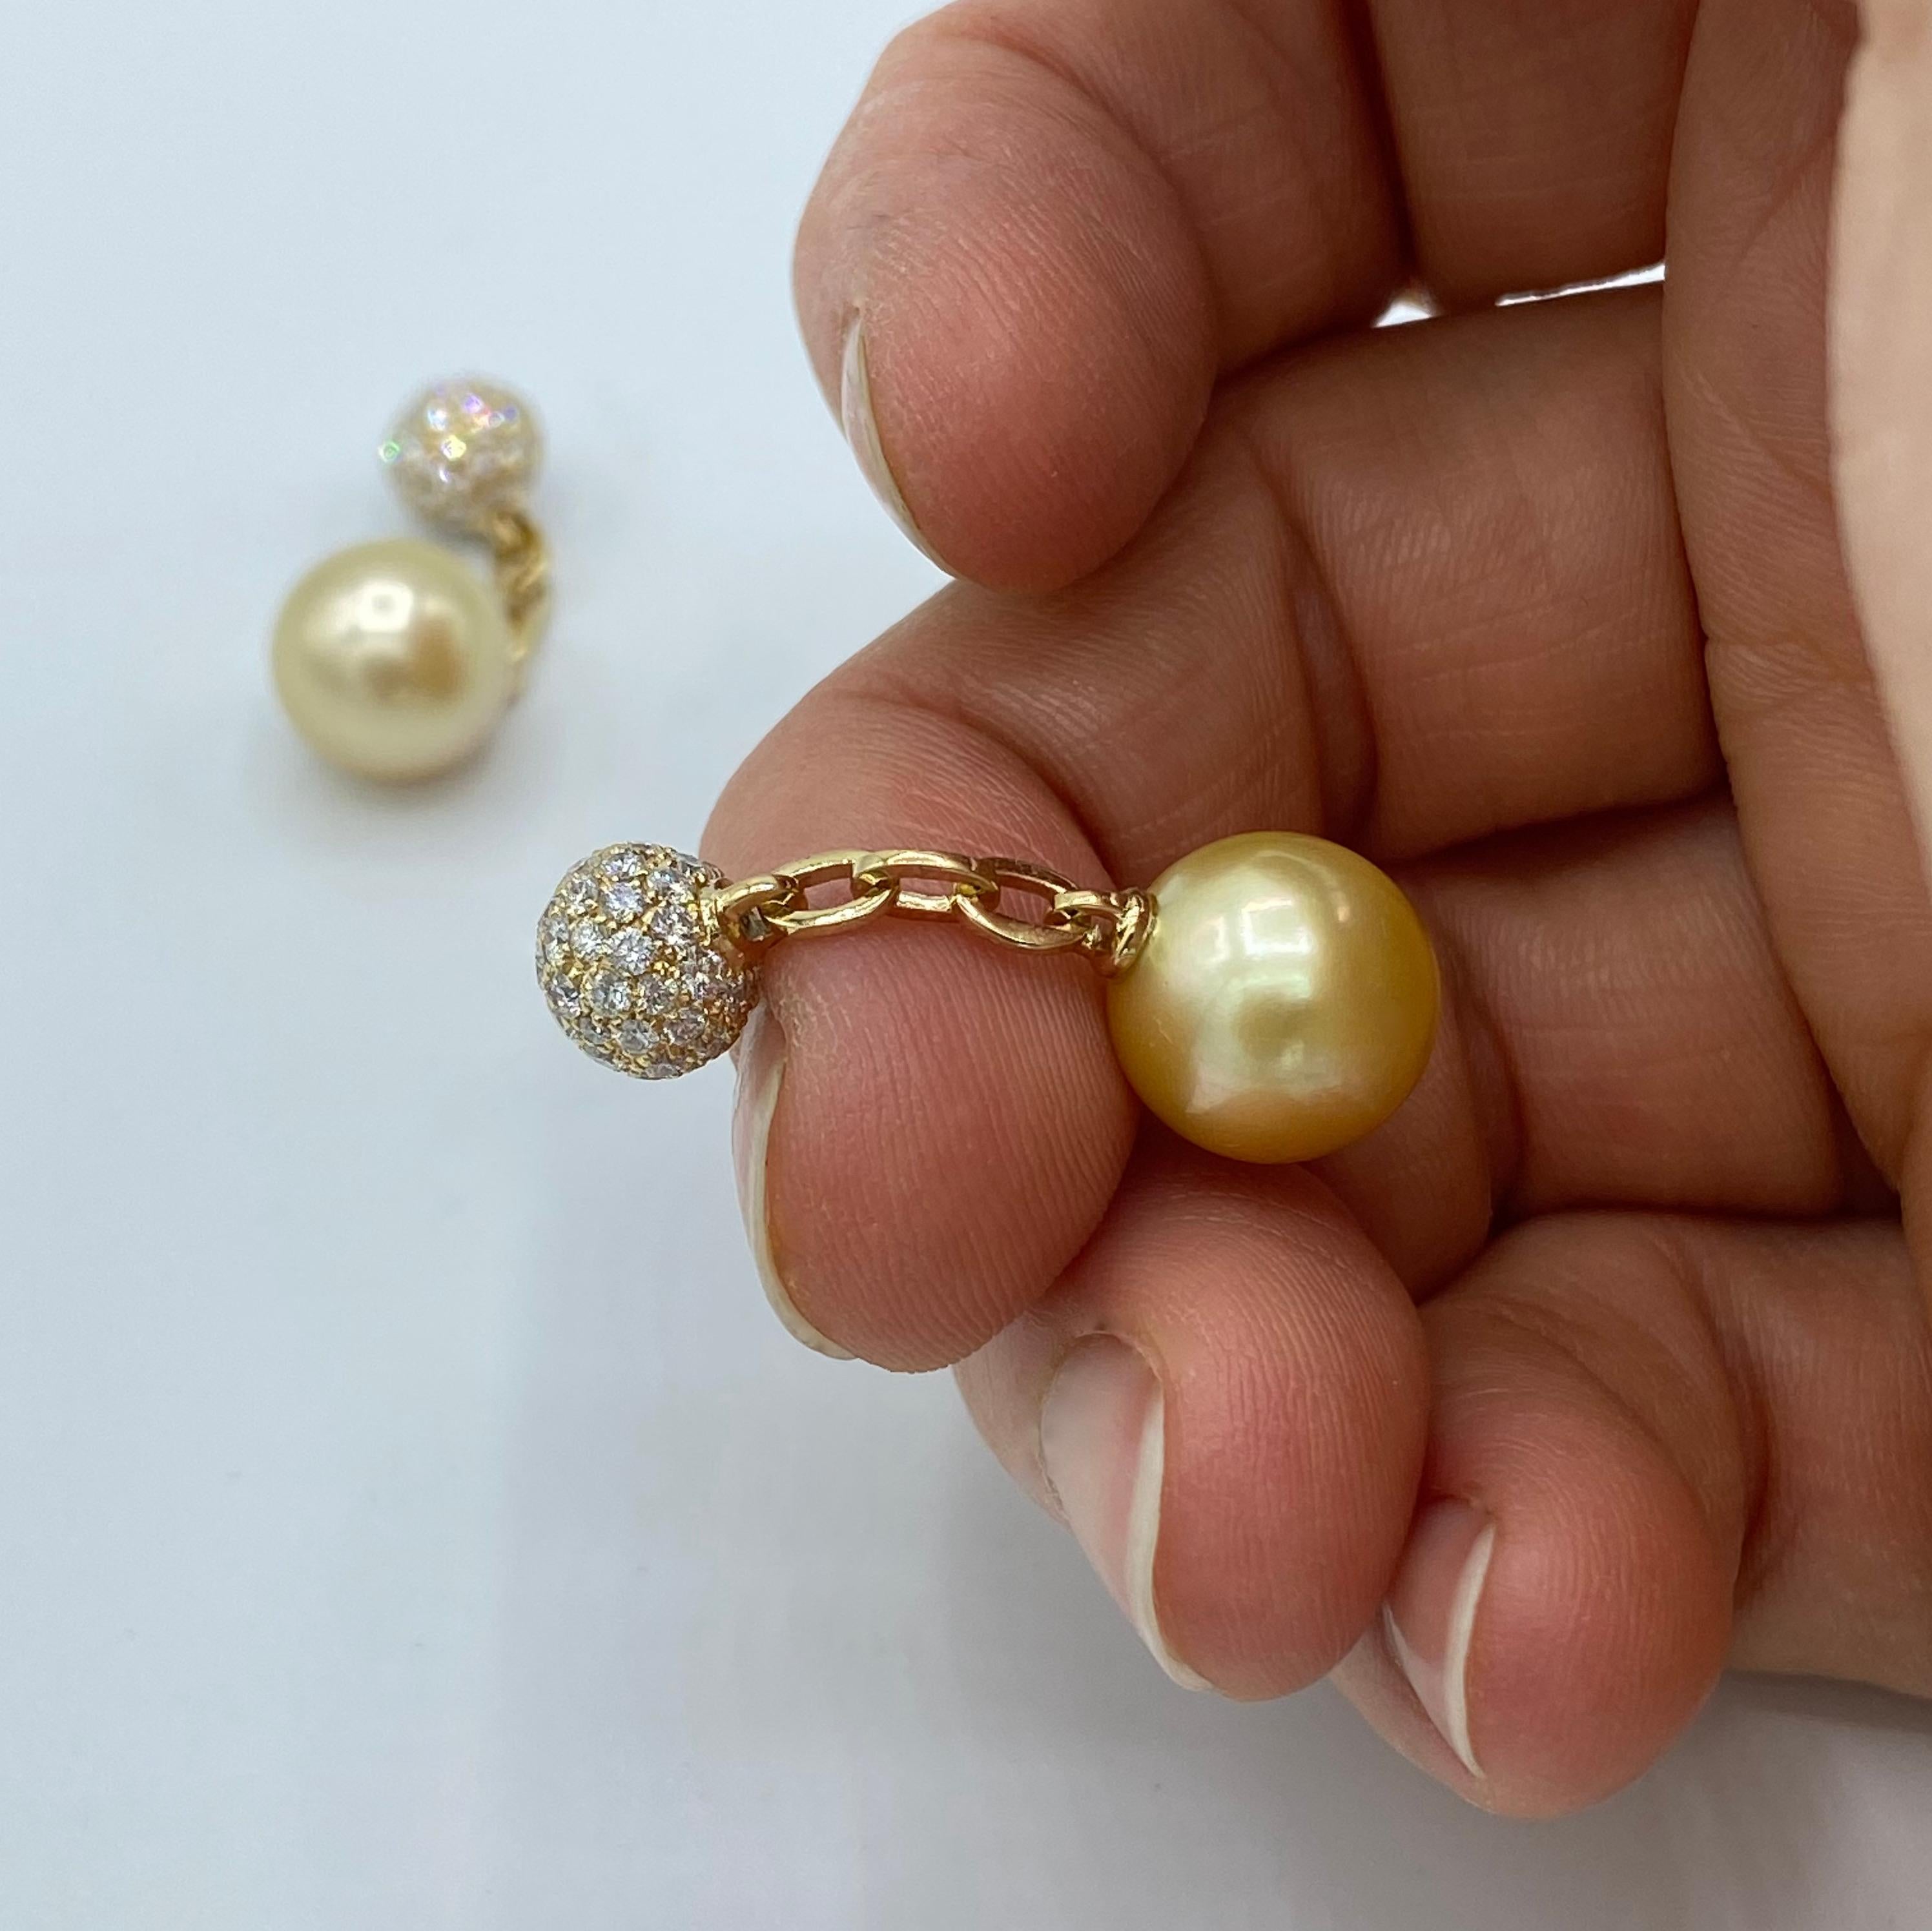 White Diamond South Sea Pearl 18 Karat Gold Cufflinks Made in Italy For Sale 1